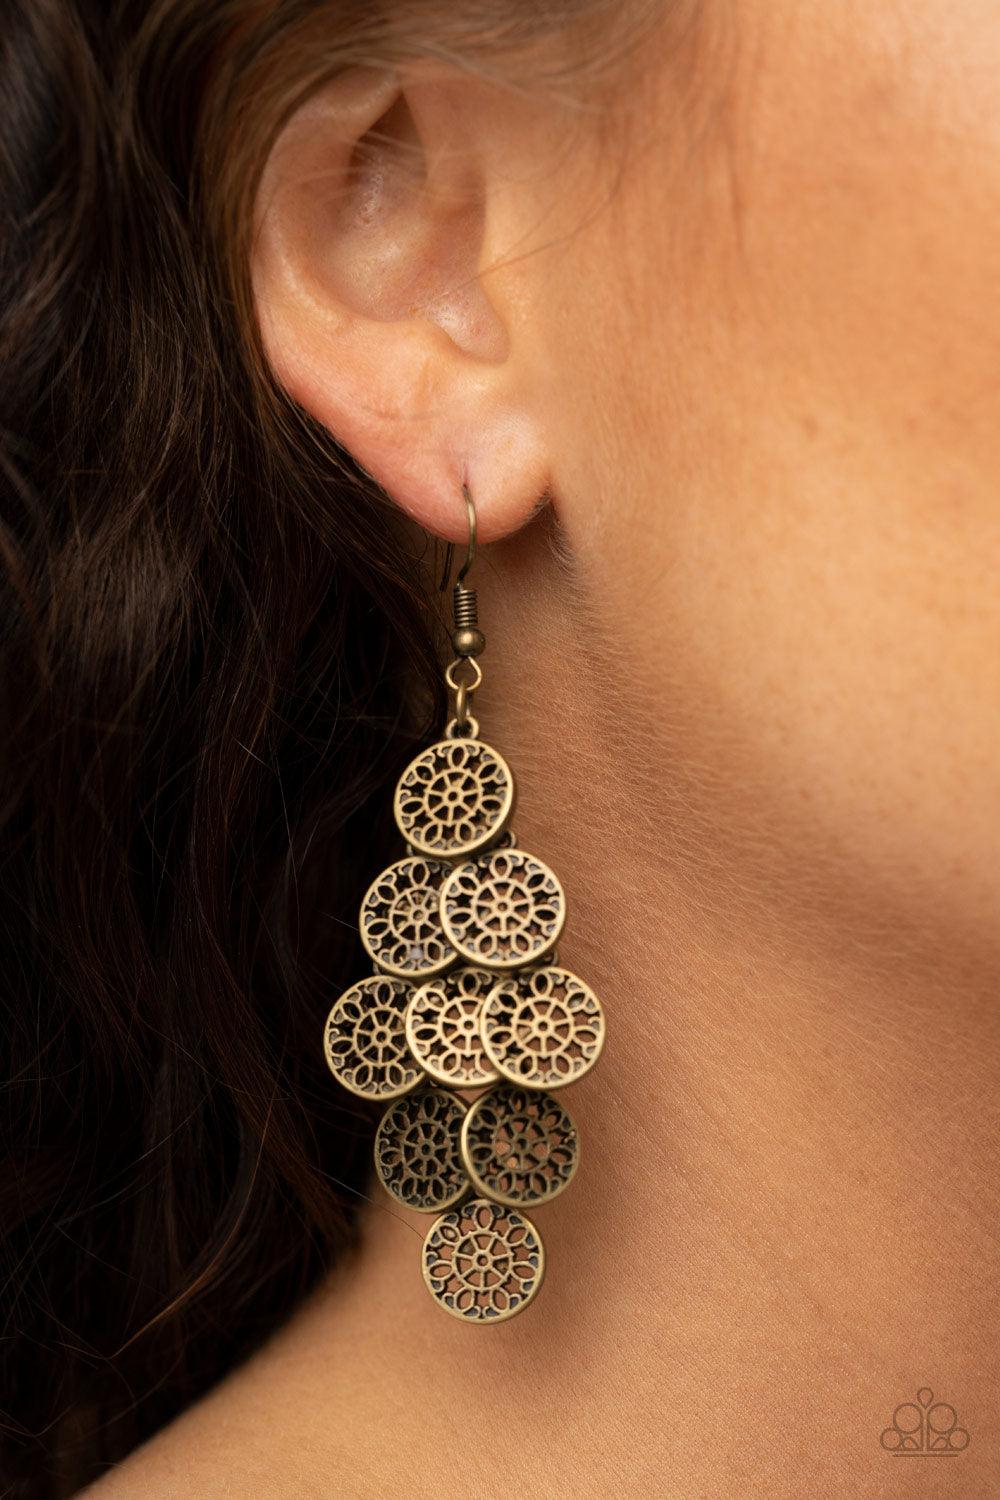 Paparazzi Accessories-Blushing Blooms - Brass Earrings